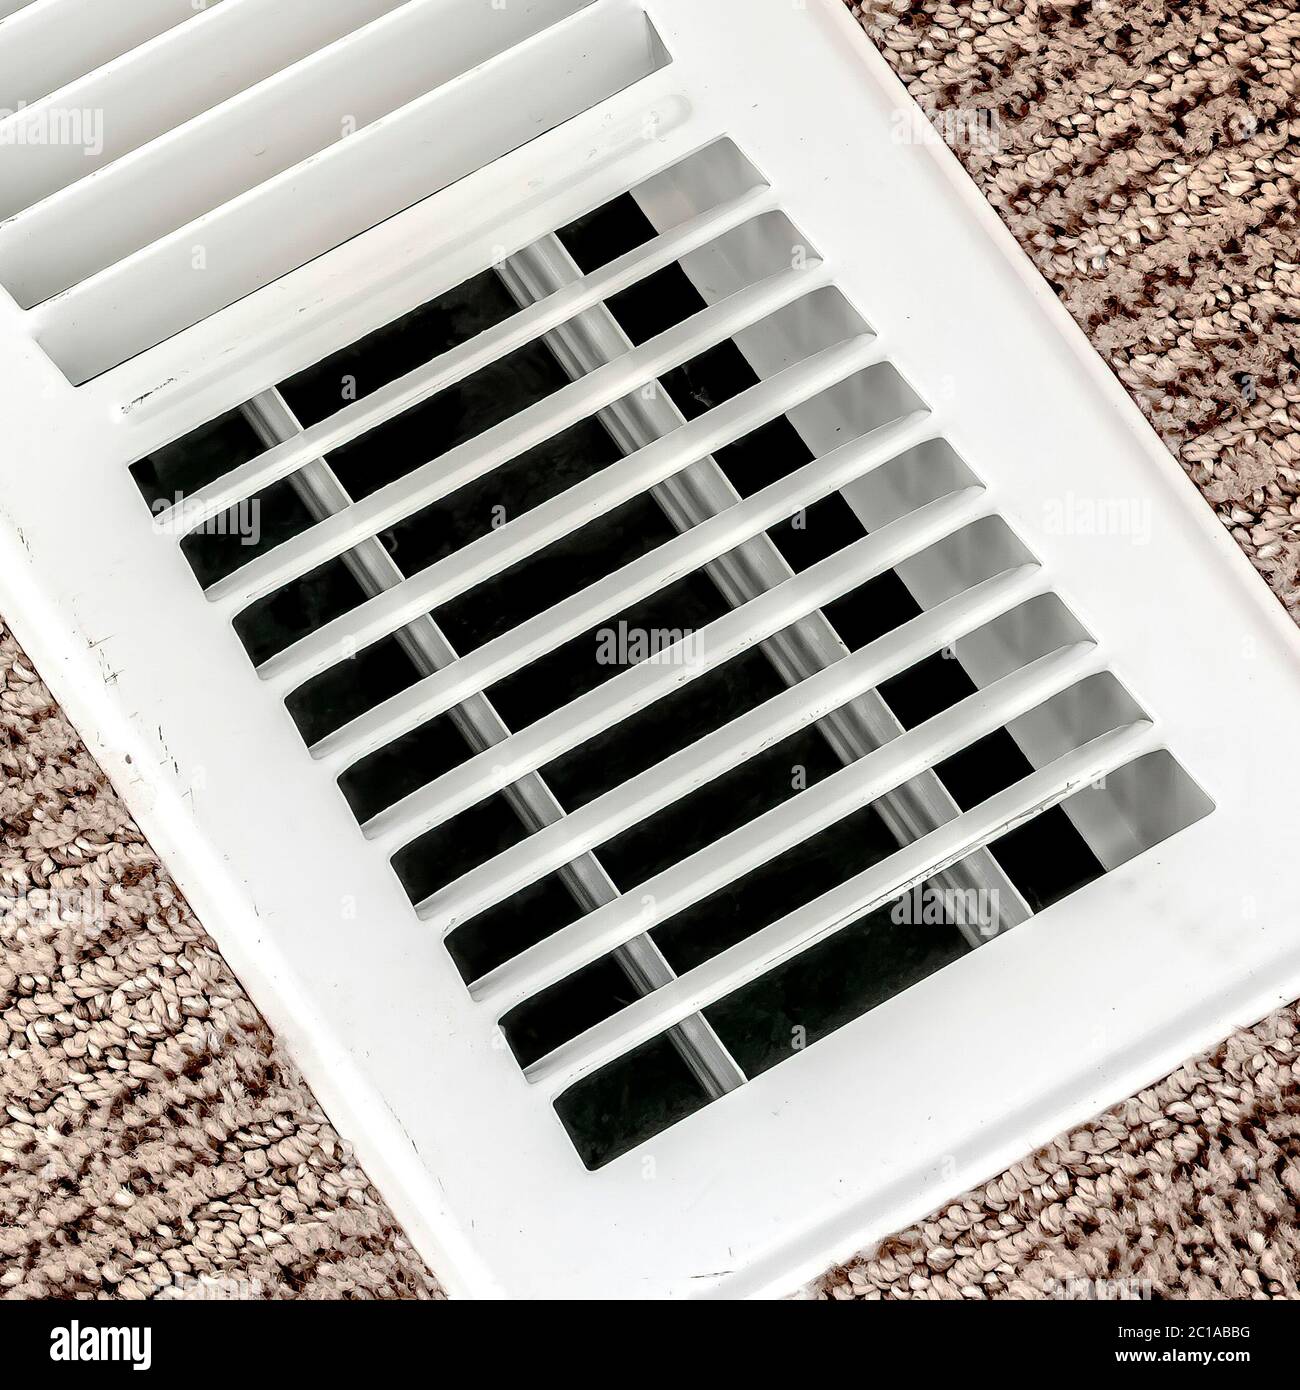 Square White air conditioner duct grille cover against floor with brown carpet Stock Photo